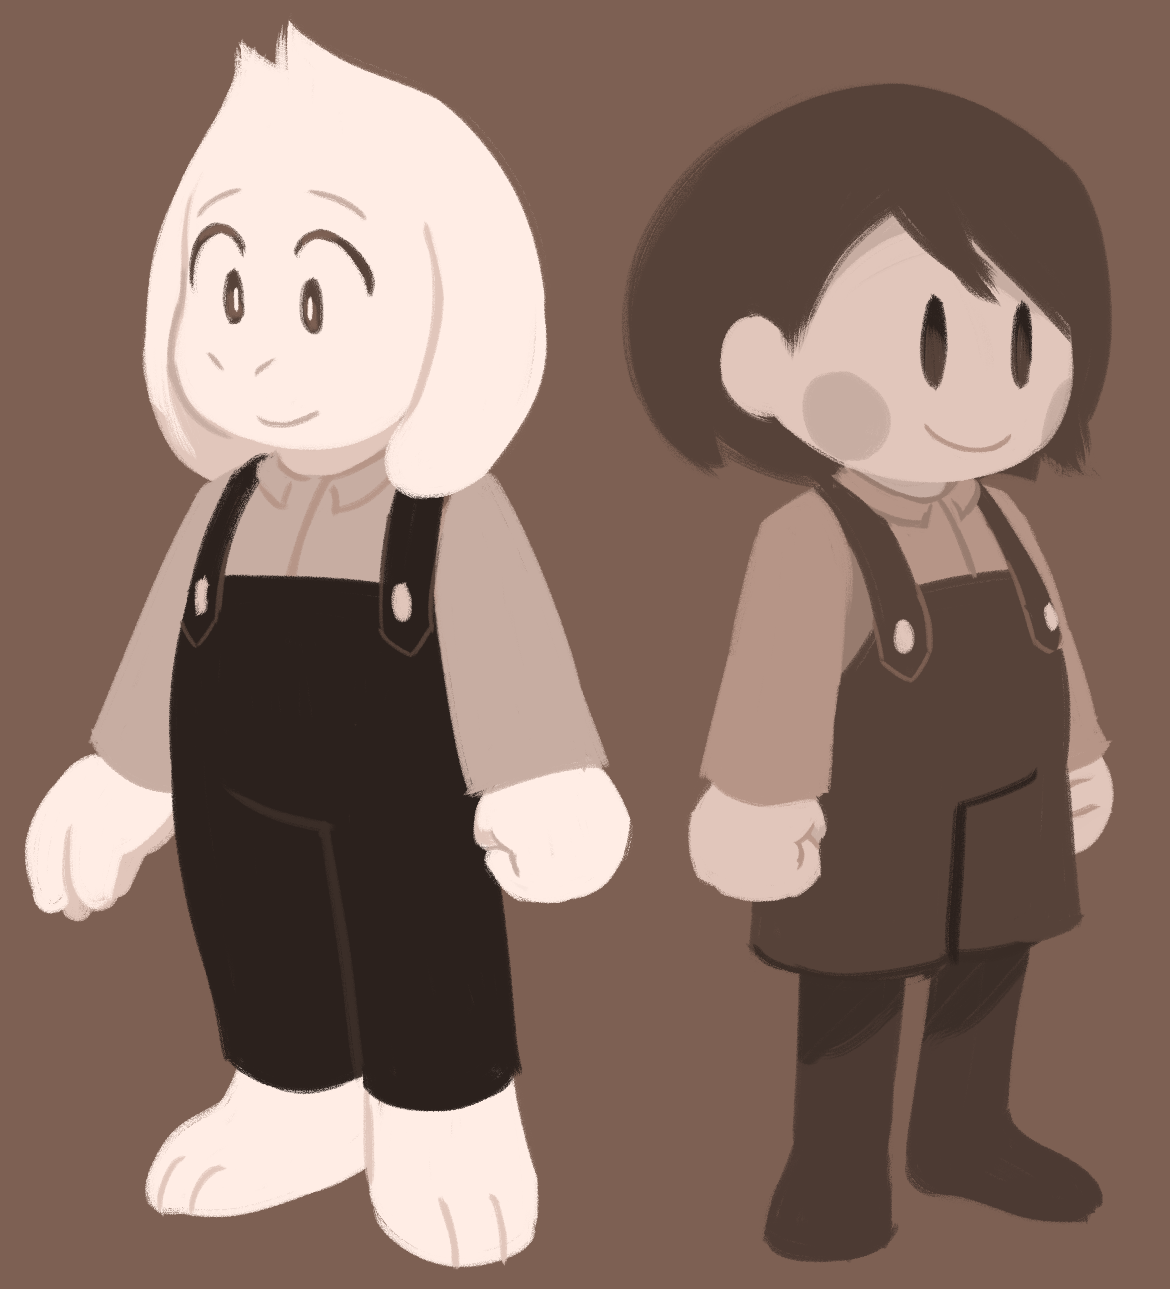 Asriel and Chara in 1920's styled outfits